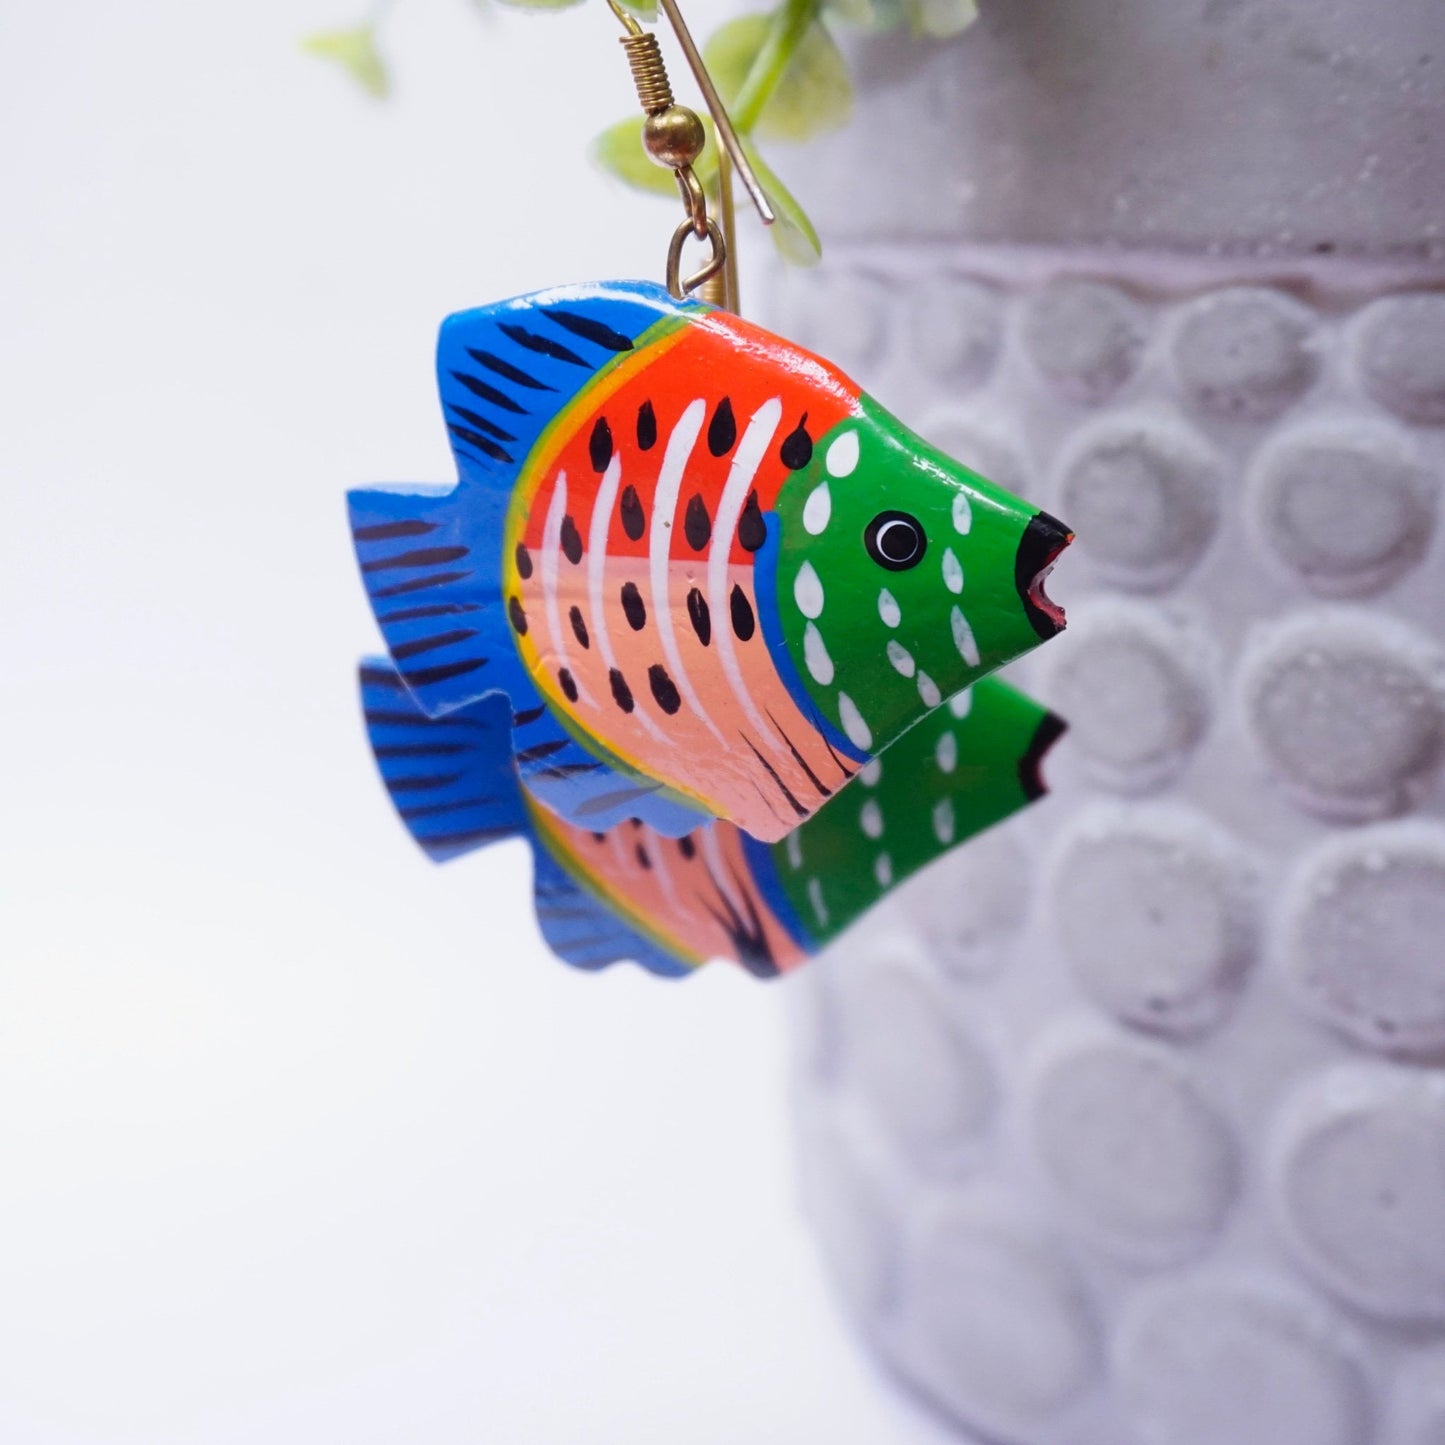 Handmade vintage colorful wood carved fish dangle earrings with detailed painting suspended against blurred background.